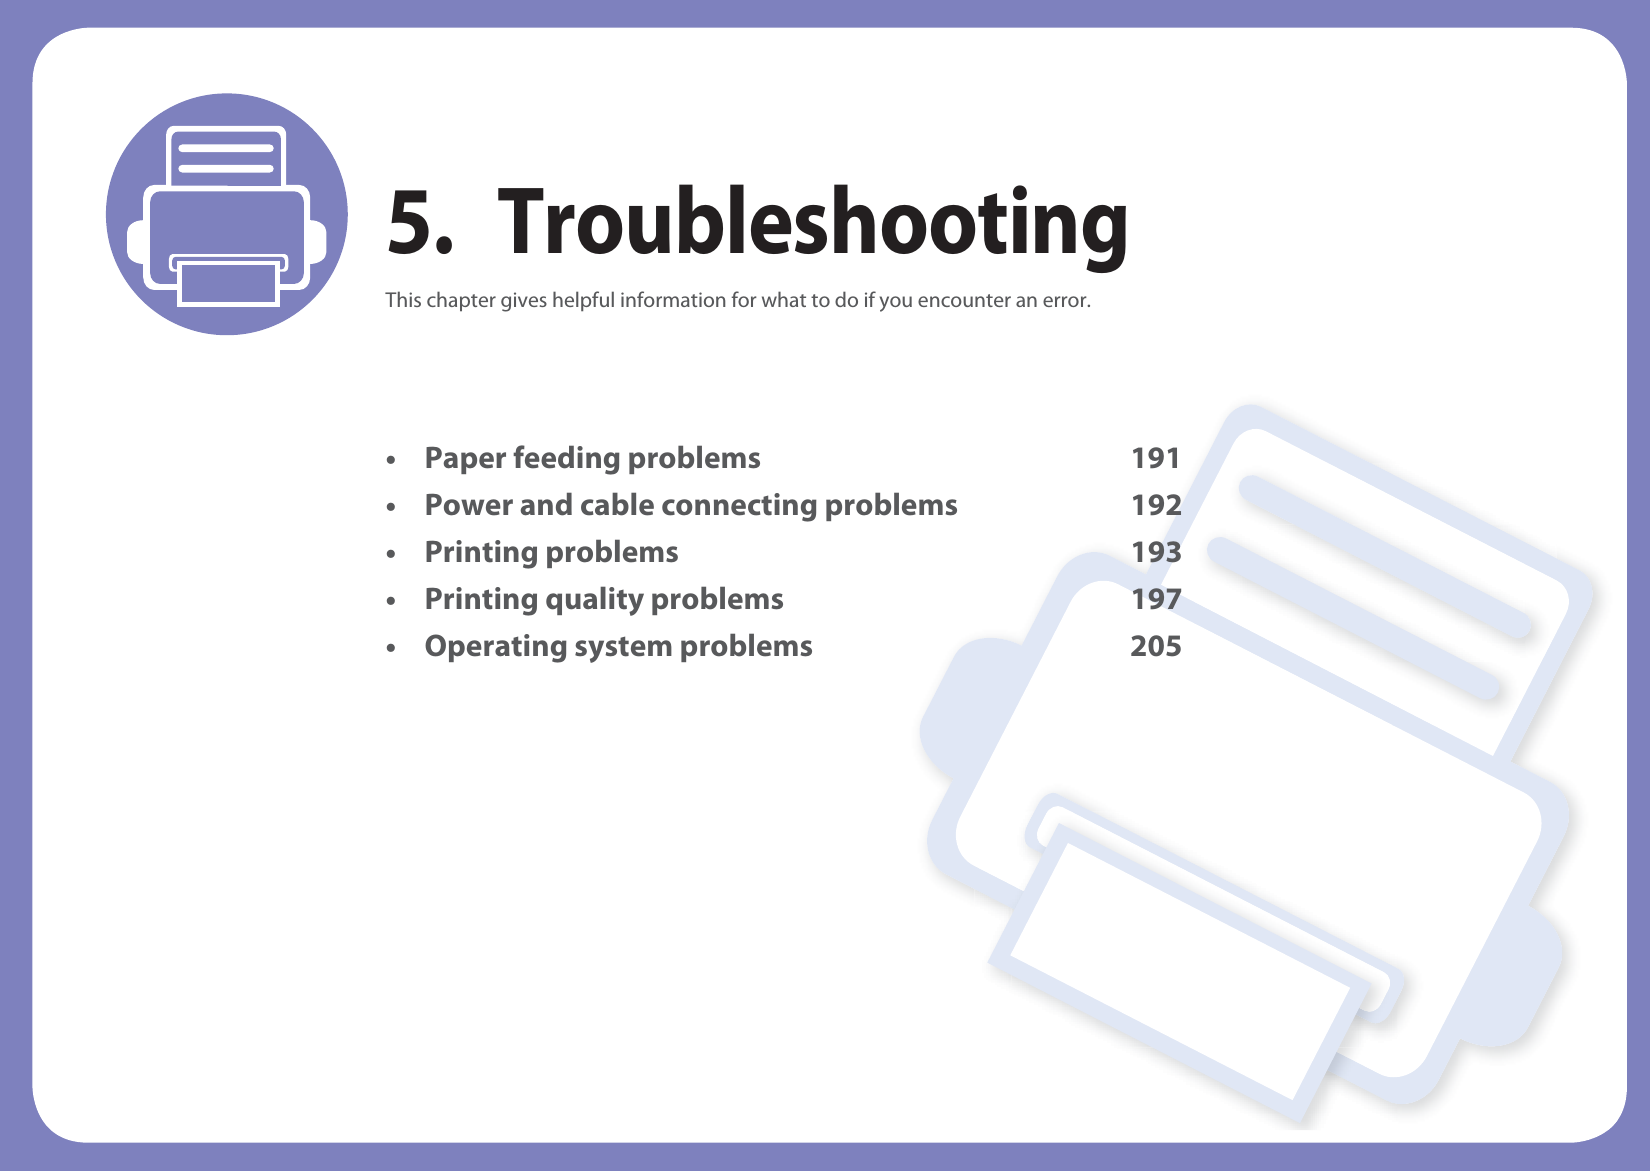 5. TroubleshootingThis chapter gives helpful information for what to do if you encounter an error.• Paper feeding problems 191• Power and cable connecting problems 192• Printing problems 193• Printing quality problems 197• Operating system problems 205